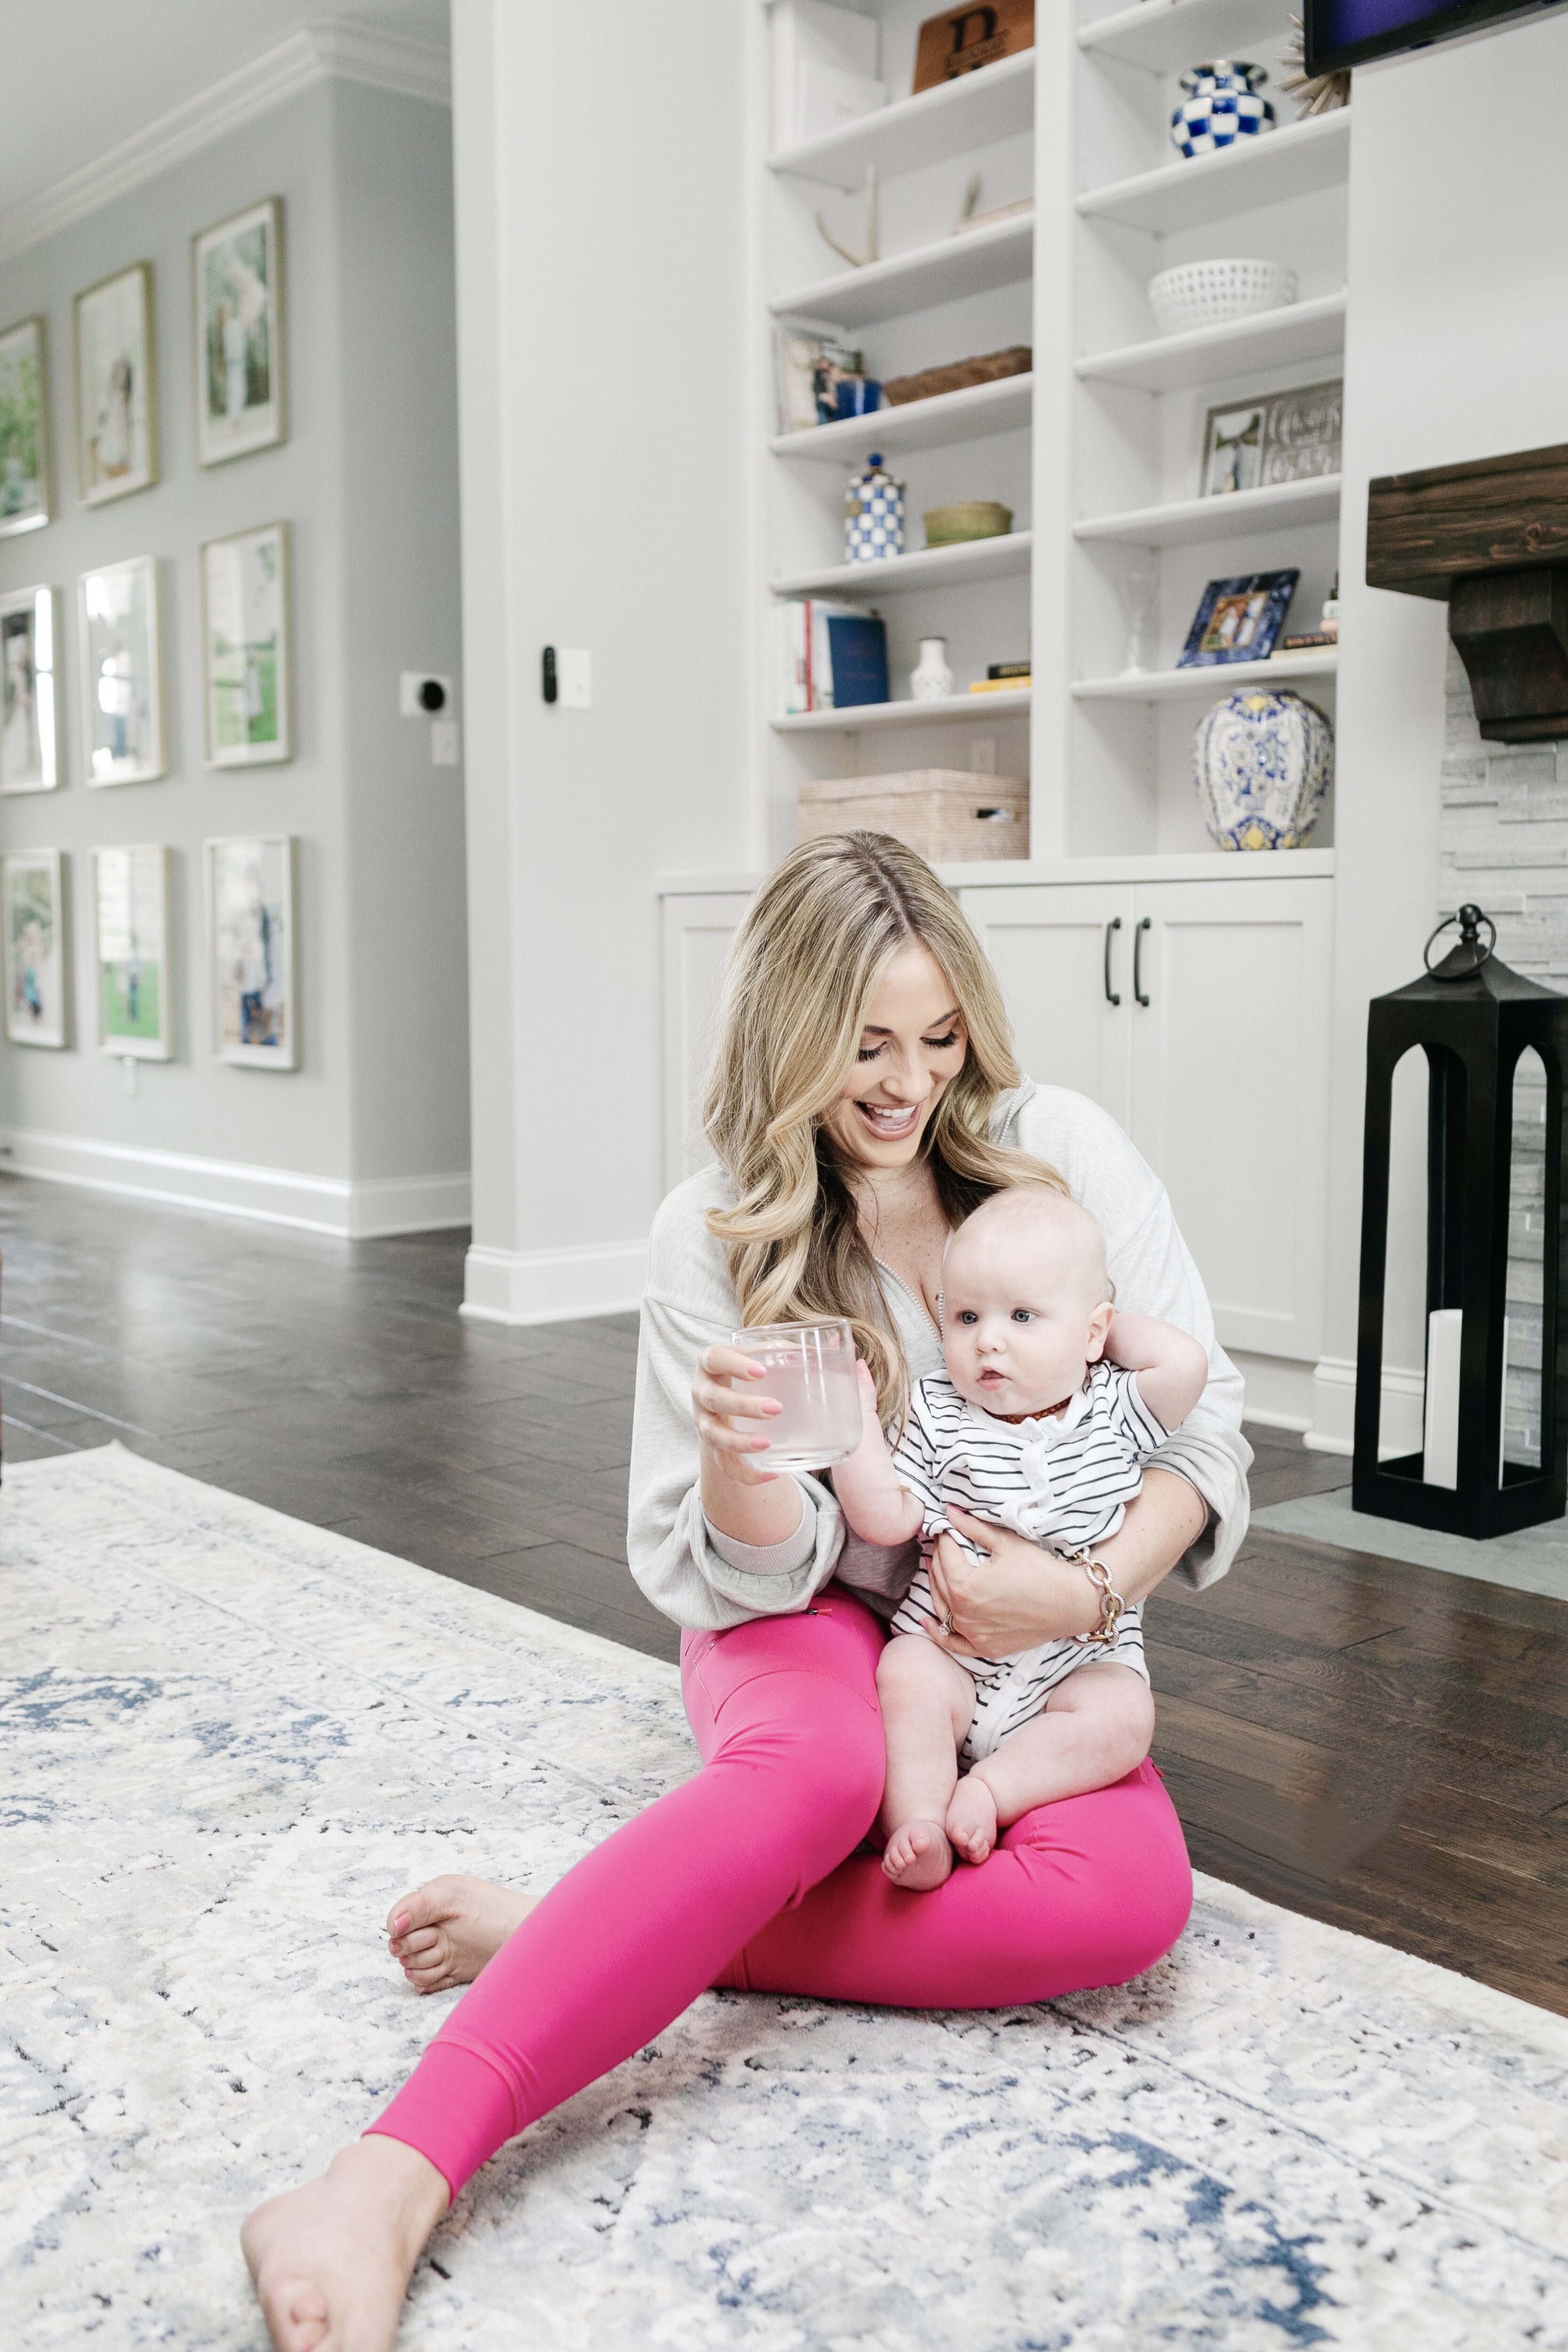 15 Modern Farmhouse Rugs You Need for Your Home featured by top US lifestyle blogger, Walking in Memphis in High Heels.